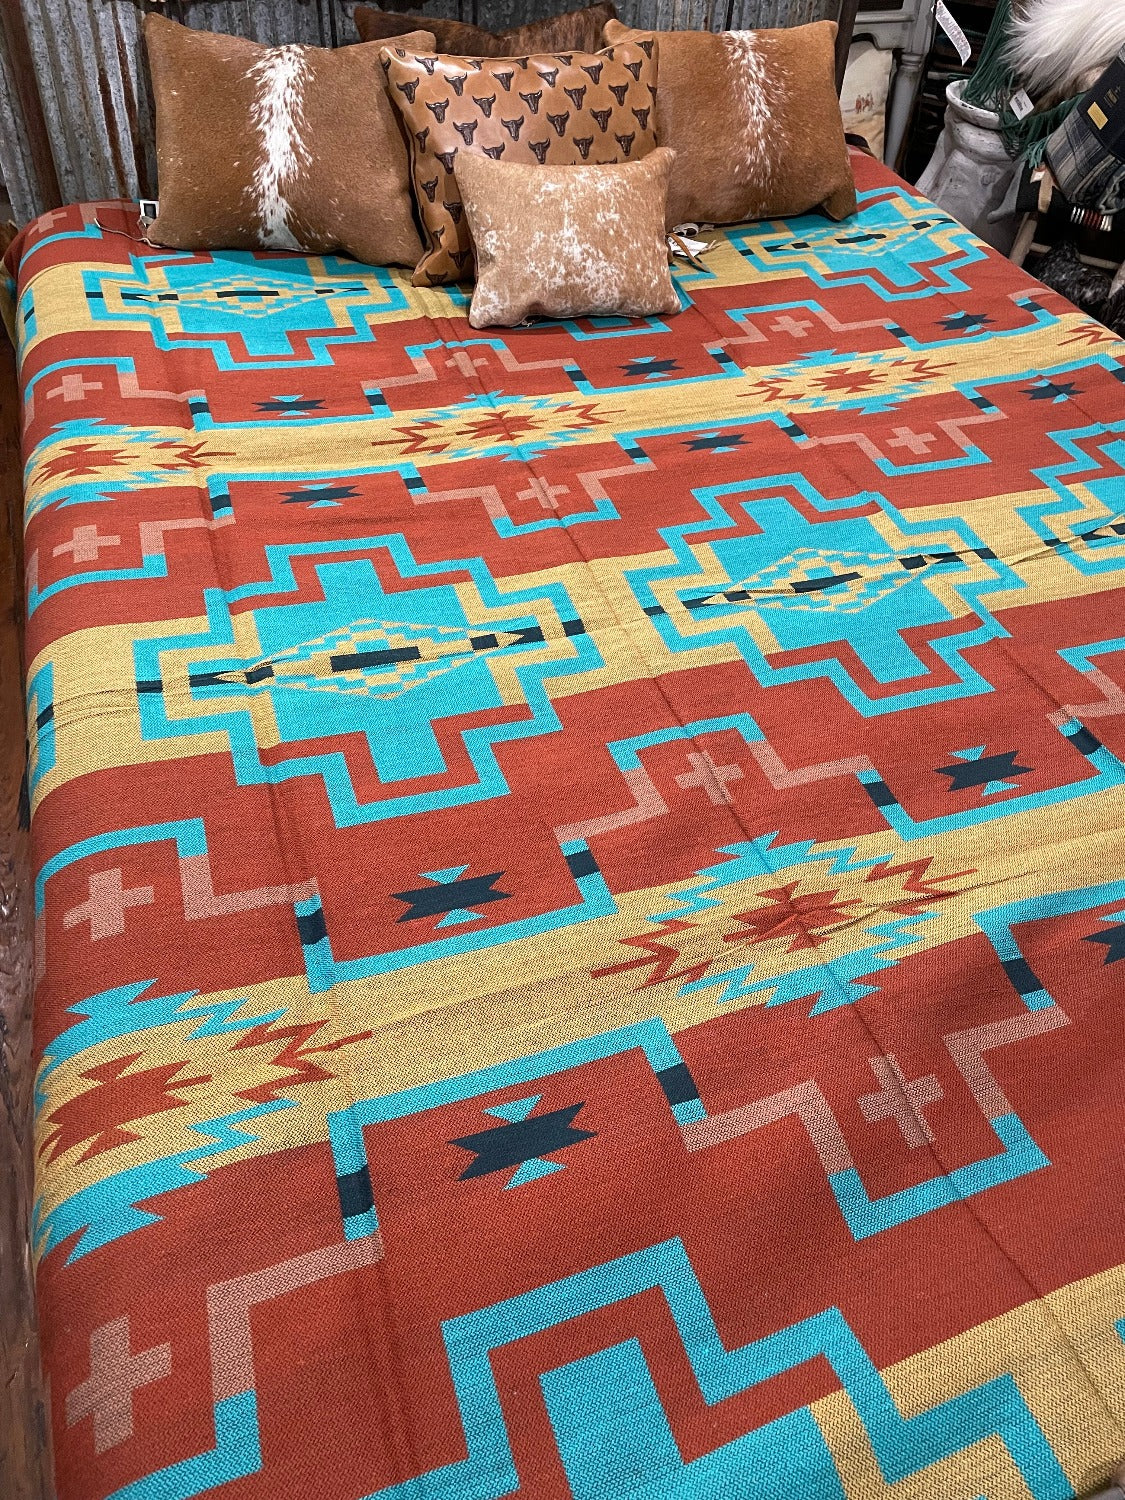 Southwestern Bedspread, Turquoise and rust crosses 7031A